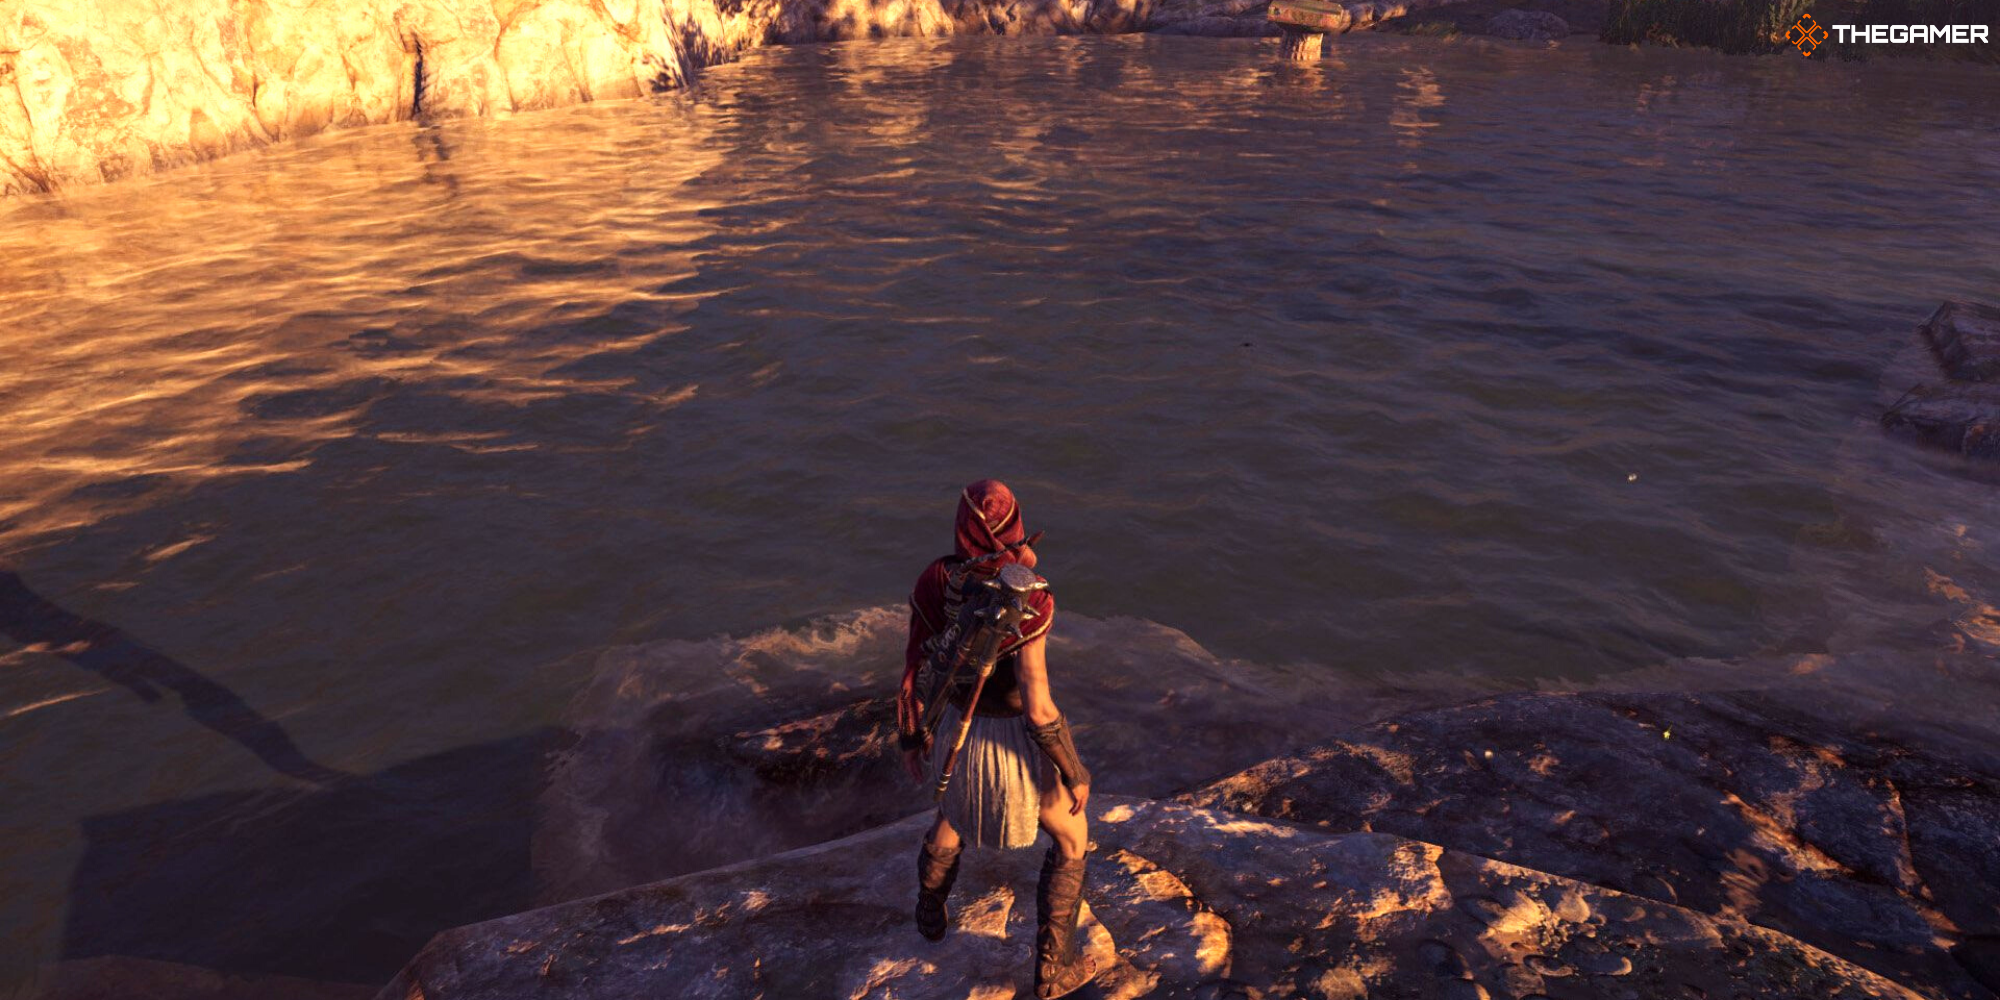 Assassin's Creed Odyssey - Kassandra overlooking a body of water